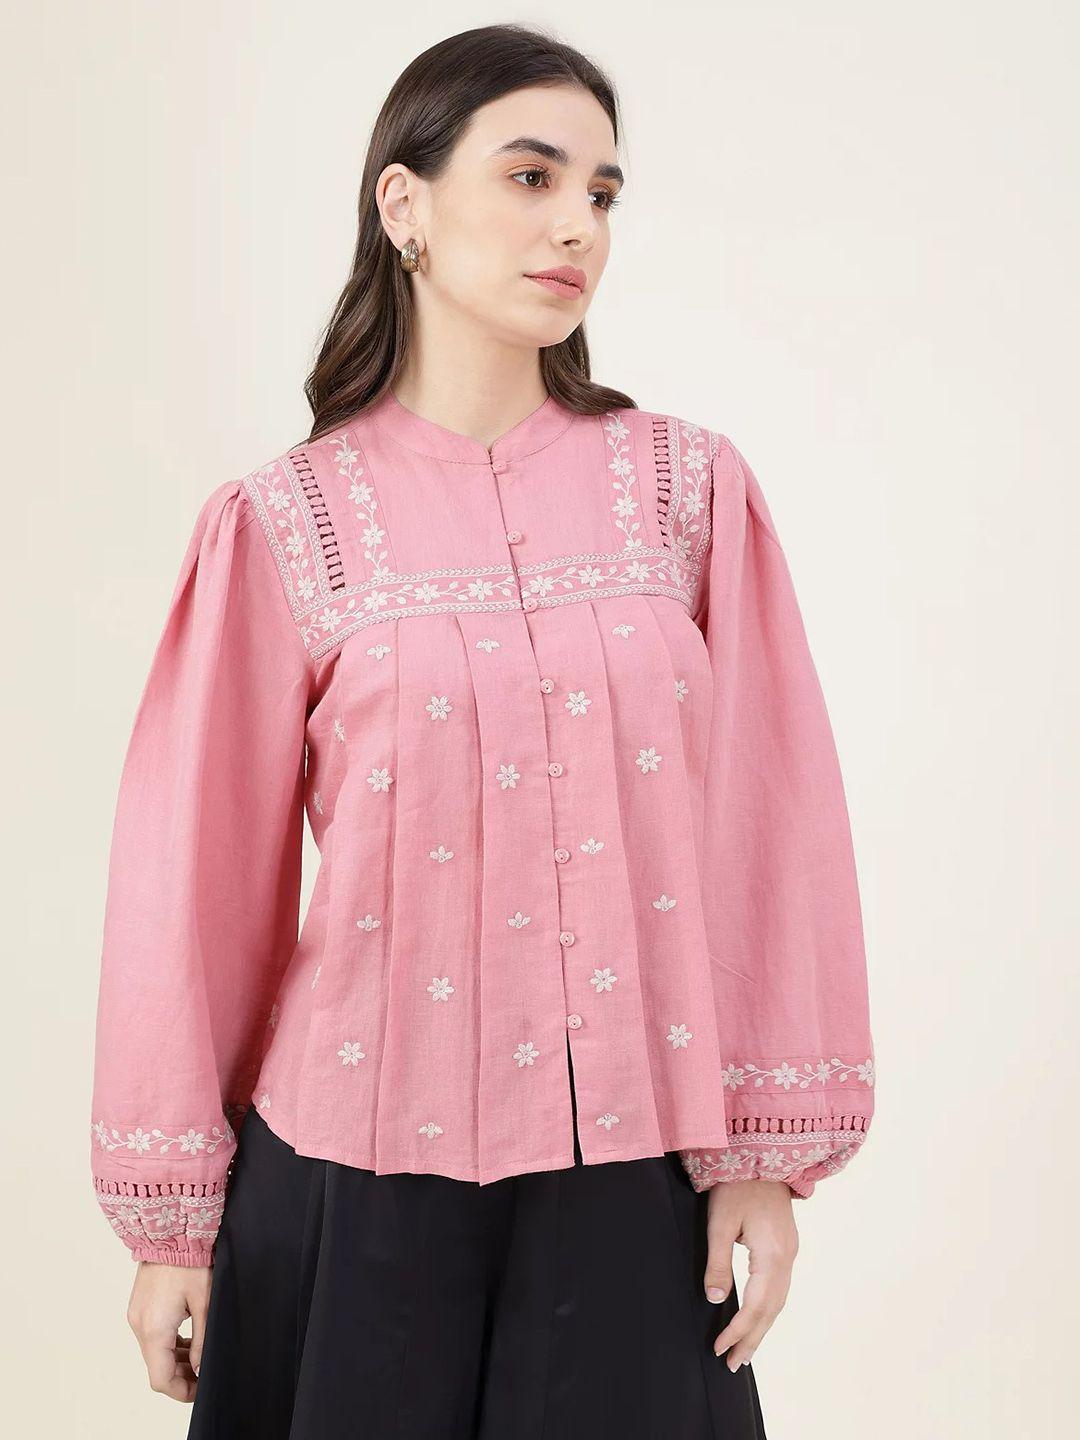 marks & spencer women pink cotton linen floral embroidered top